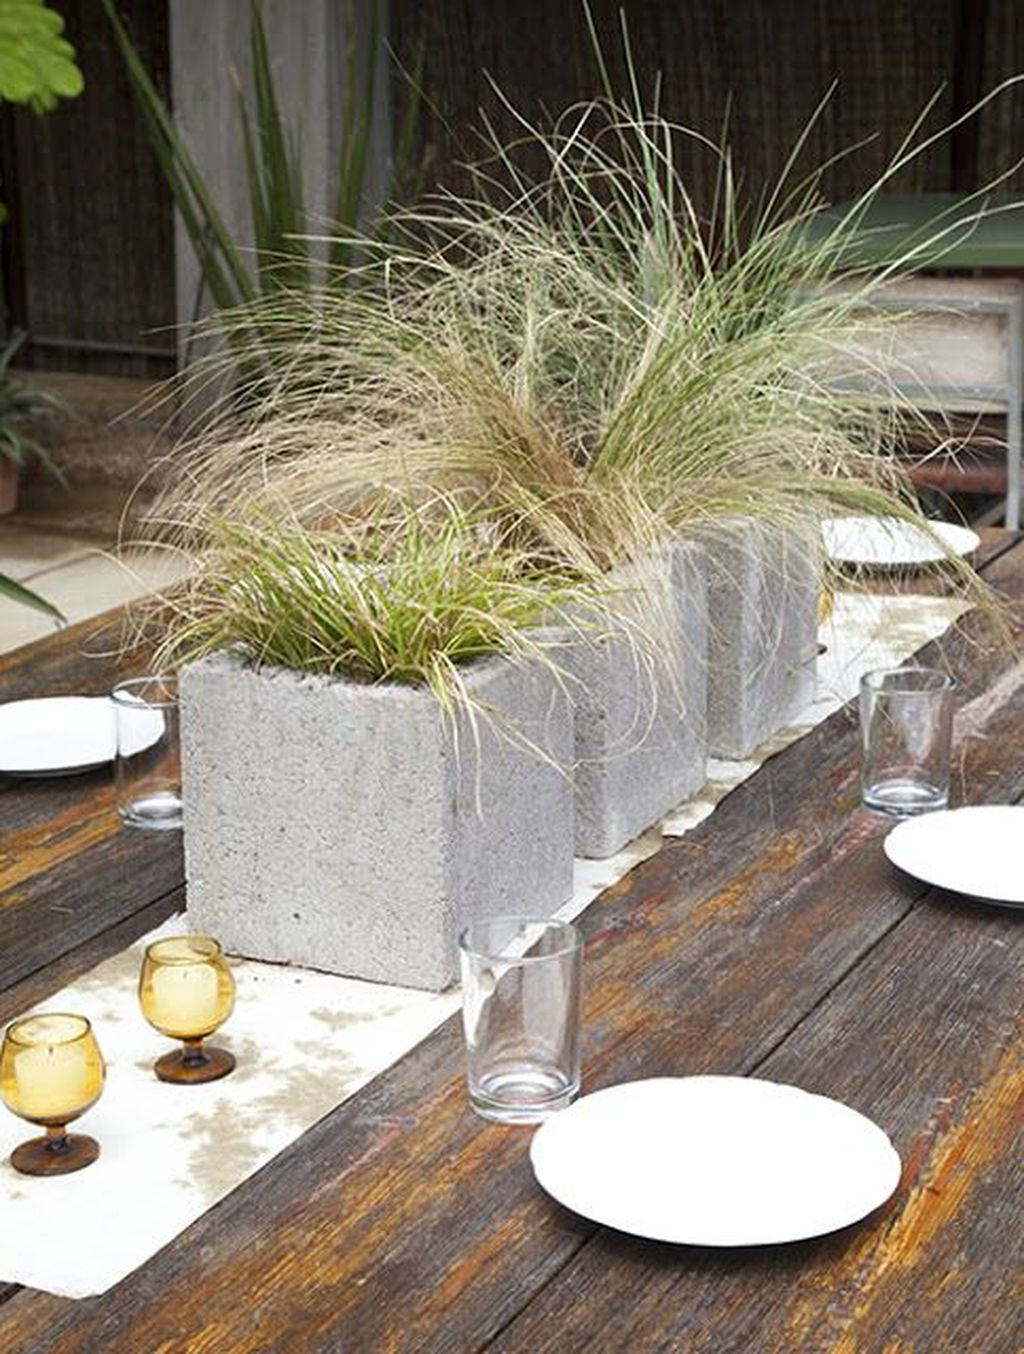 Stylish Garden Design Ideas With Cinder Block To Try 11